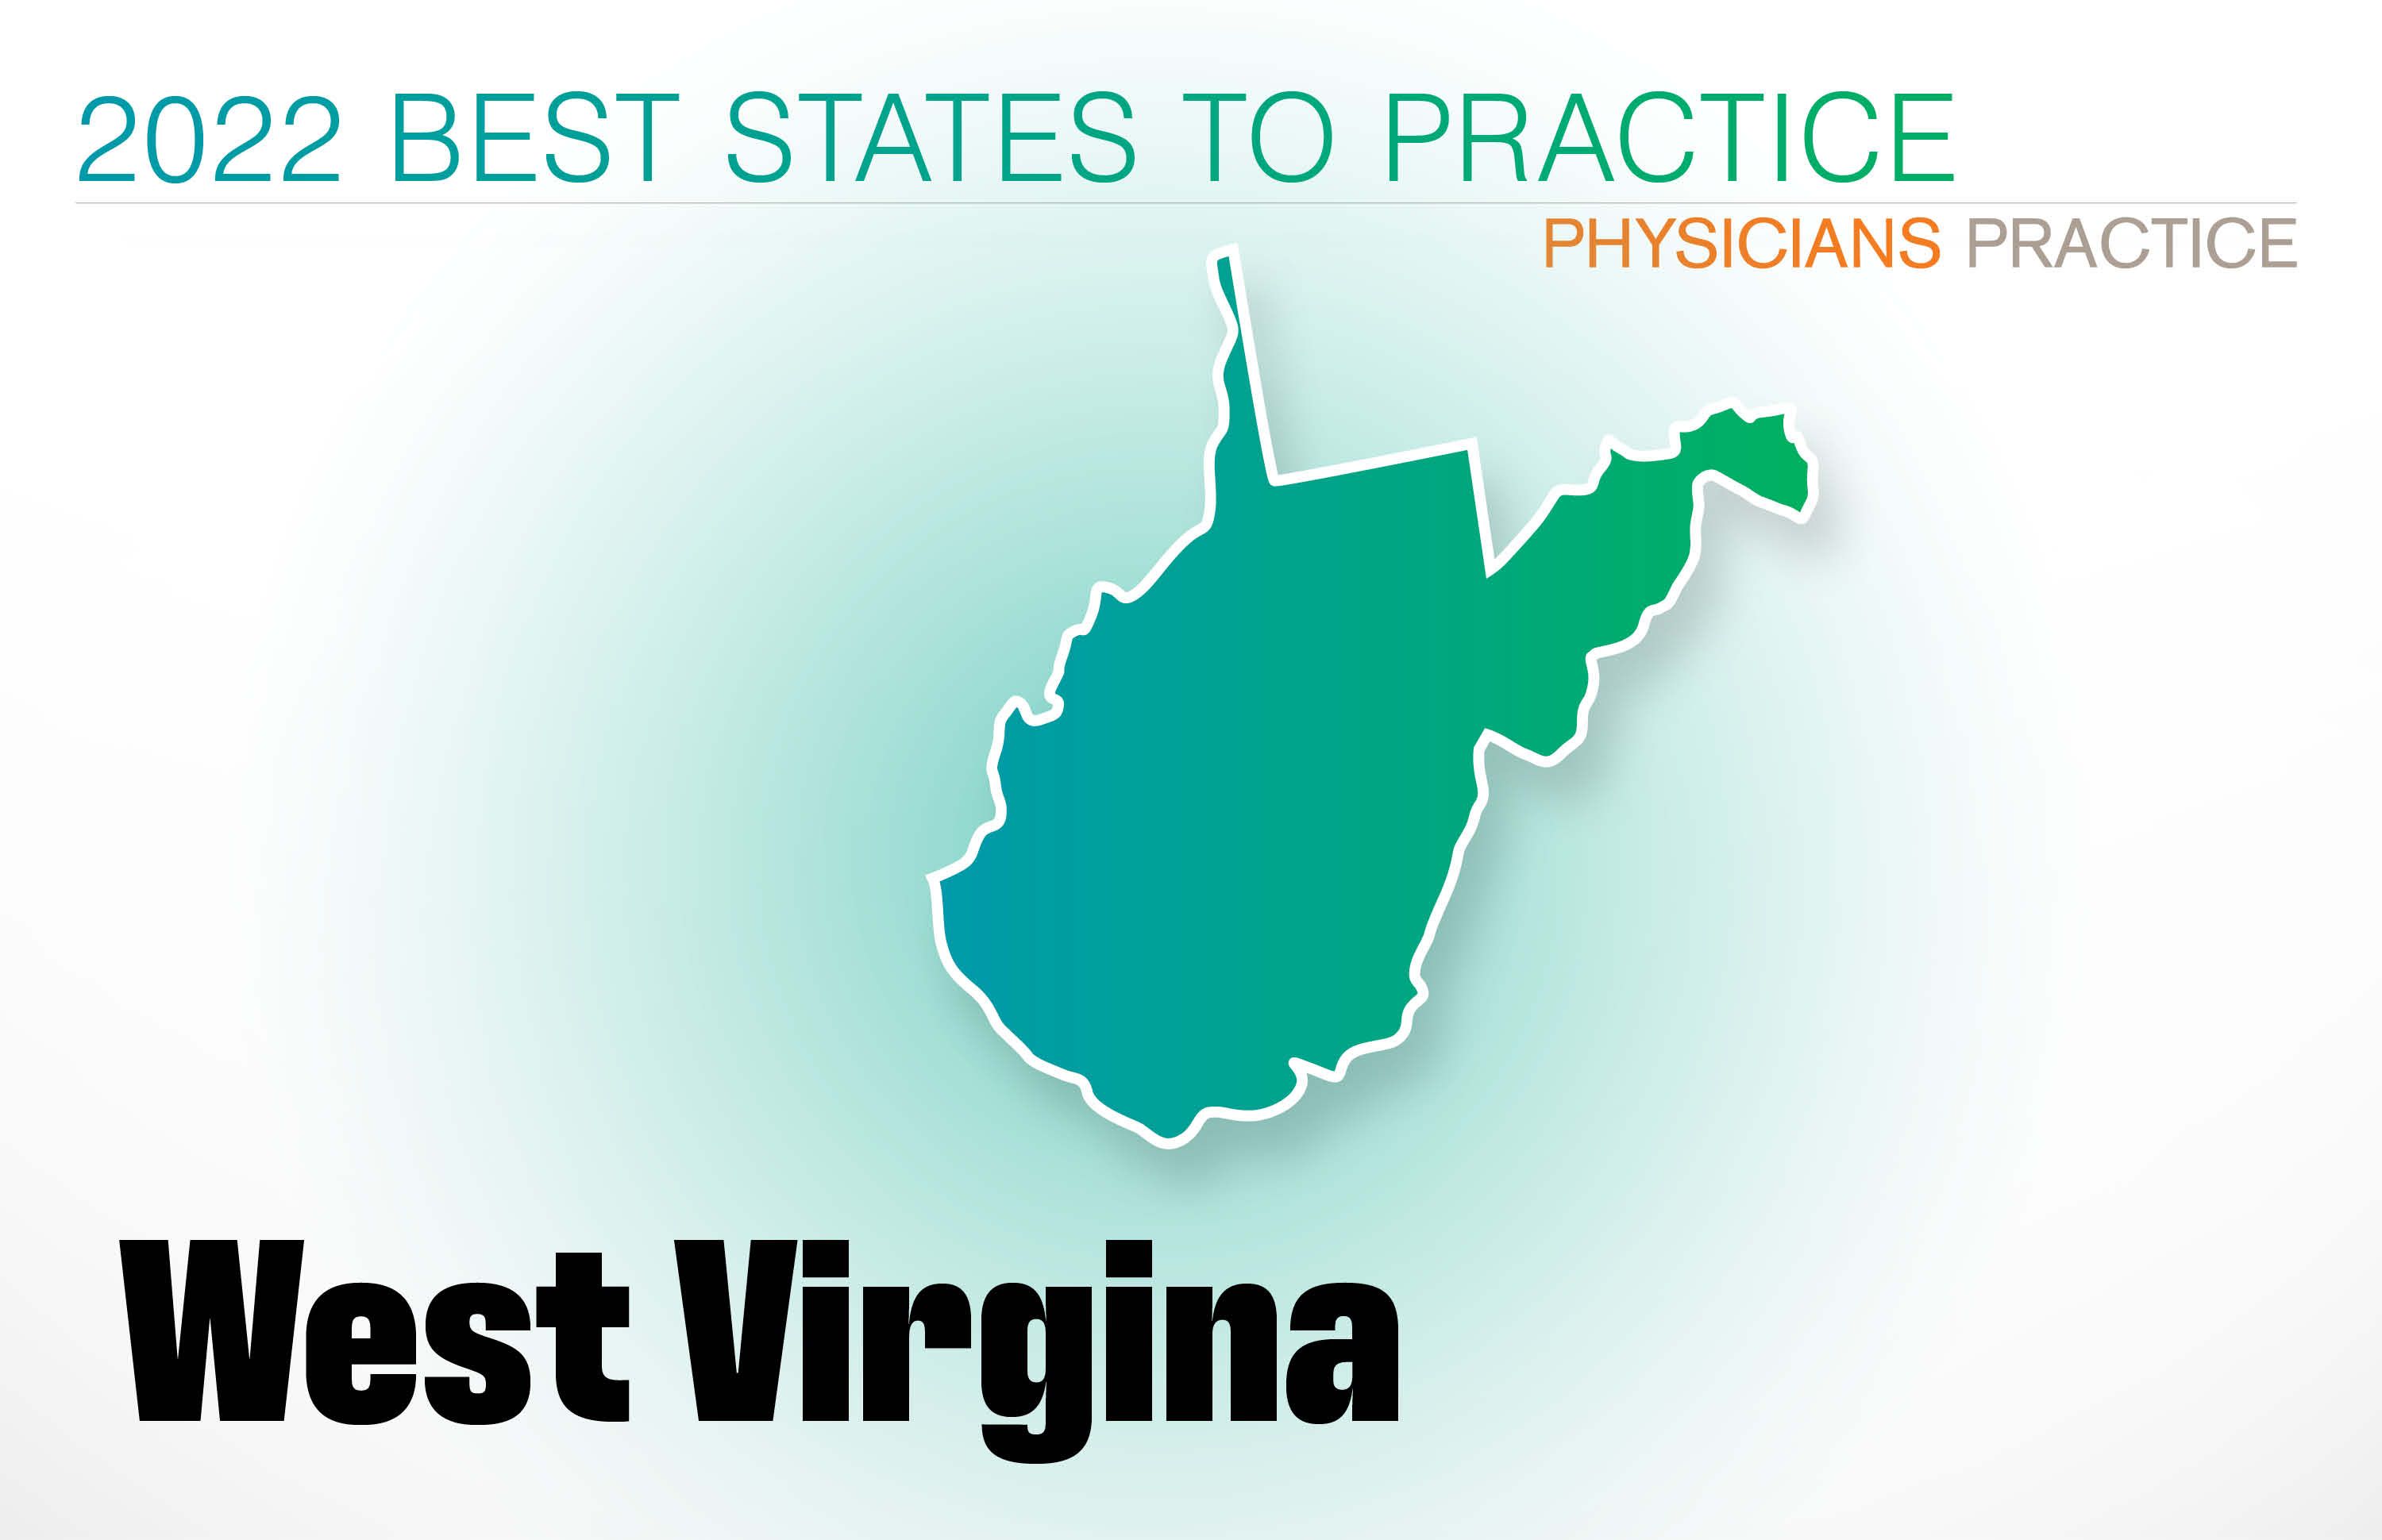 #39 West Virginia Rankings: Cost of living: 11 Physician density: 27 Amount of state business taxes collected: 21 Average malpractice insurance rates: 45 Quality of life: 42 GPCI: 39